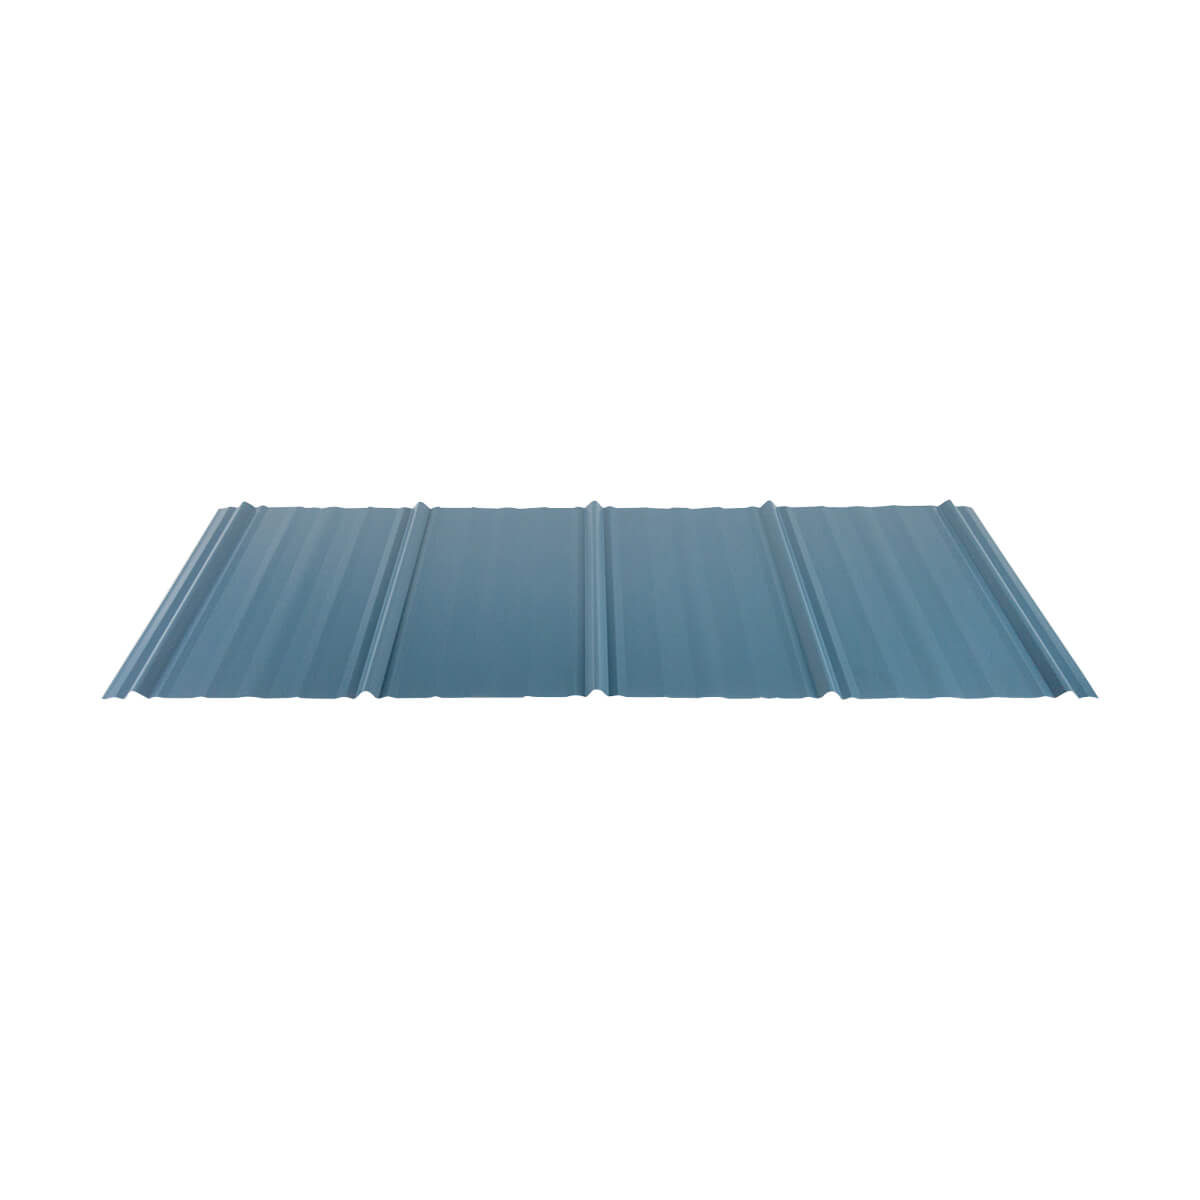 WeatherShield 1 Metal Sheets or Panels - 32-in x 14-ft